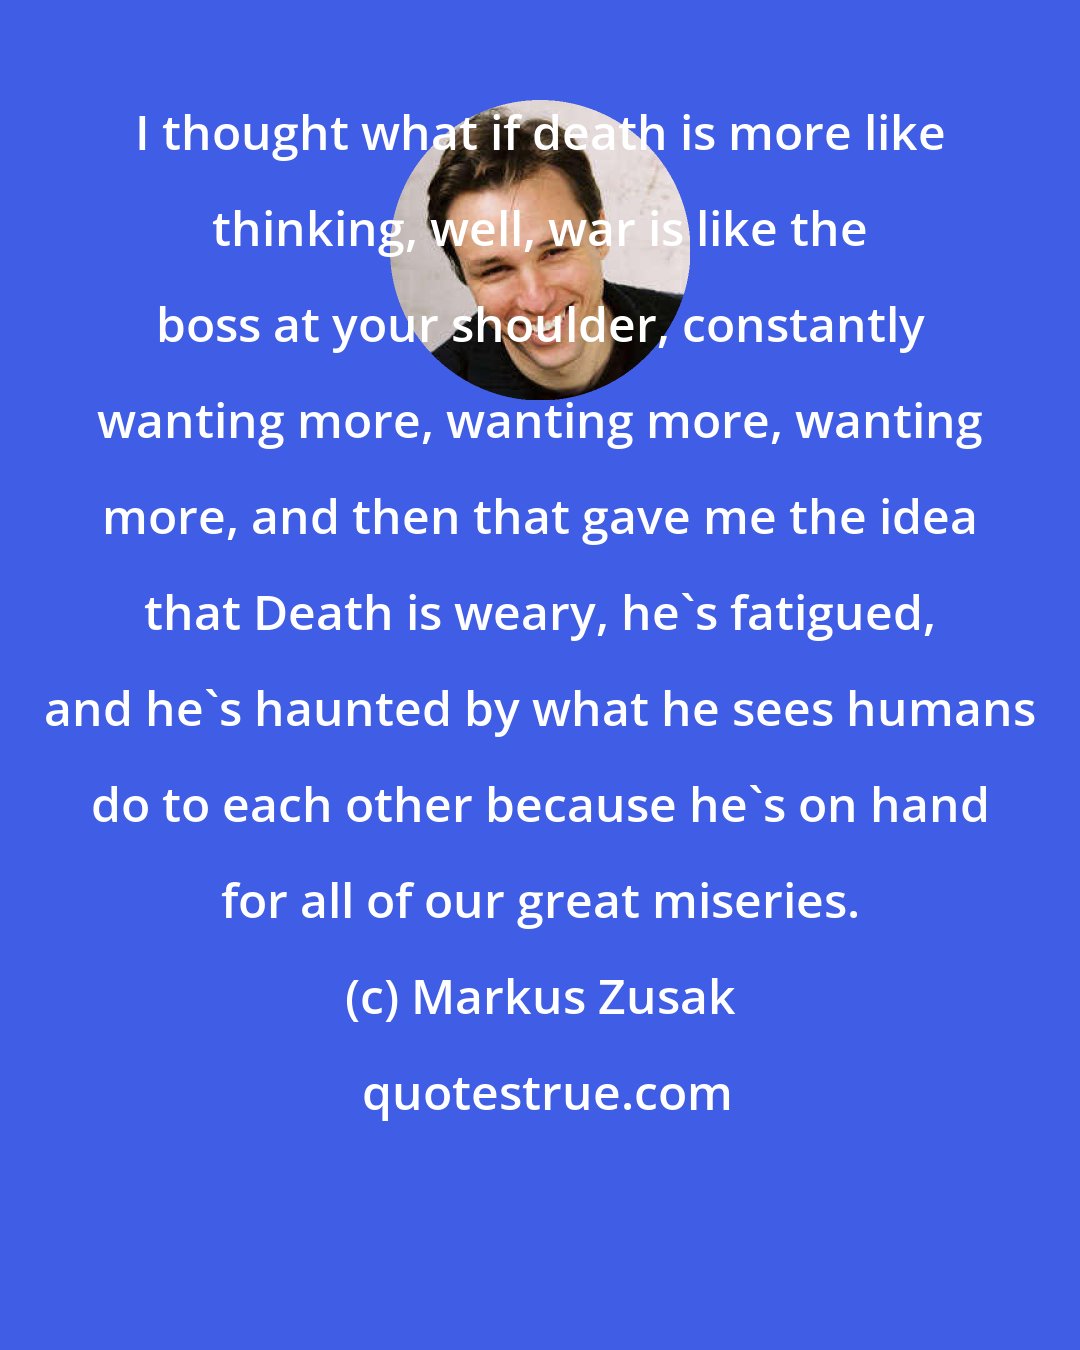 Markus Zusak: I thought what if death is more like thinking, well, war is like the boss at your shoulder, constantly wanting more, wanting more, wanting more, and then that gave me the idea that Death is weary, he's fatigued, and he's haunted by what he sees humans do to each other because he's on hand for all of our great miseries.